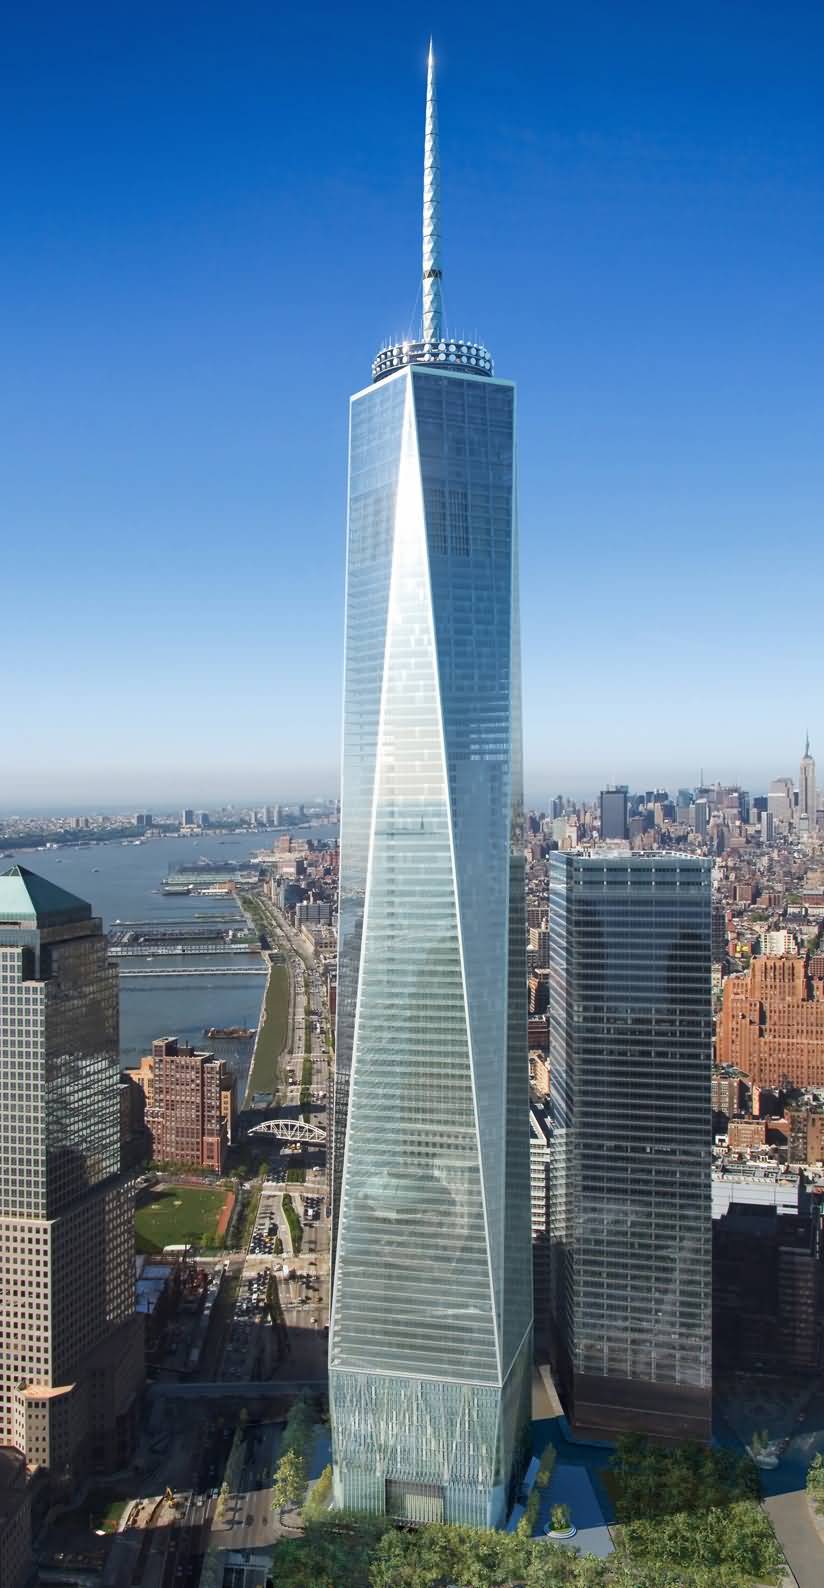 After Burj Khalifa One World Trade Center, NY, US is world's 2nd tallest building